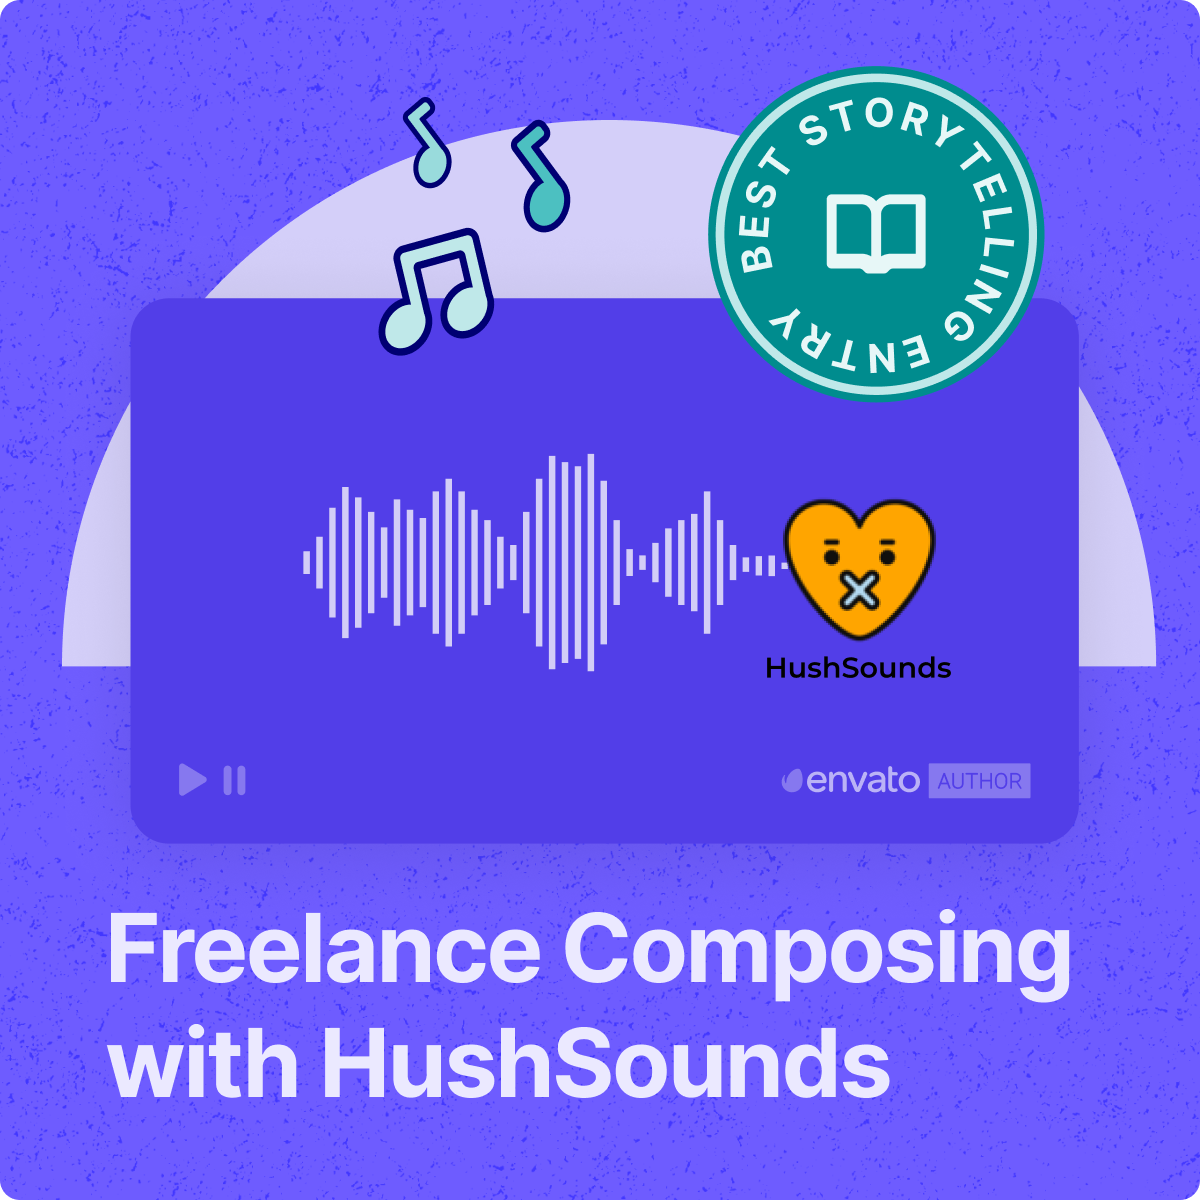 Freelance Composing with HushSounds